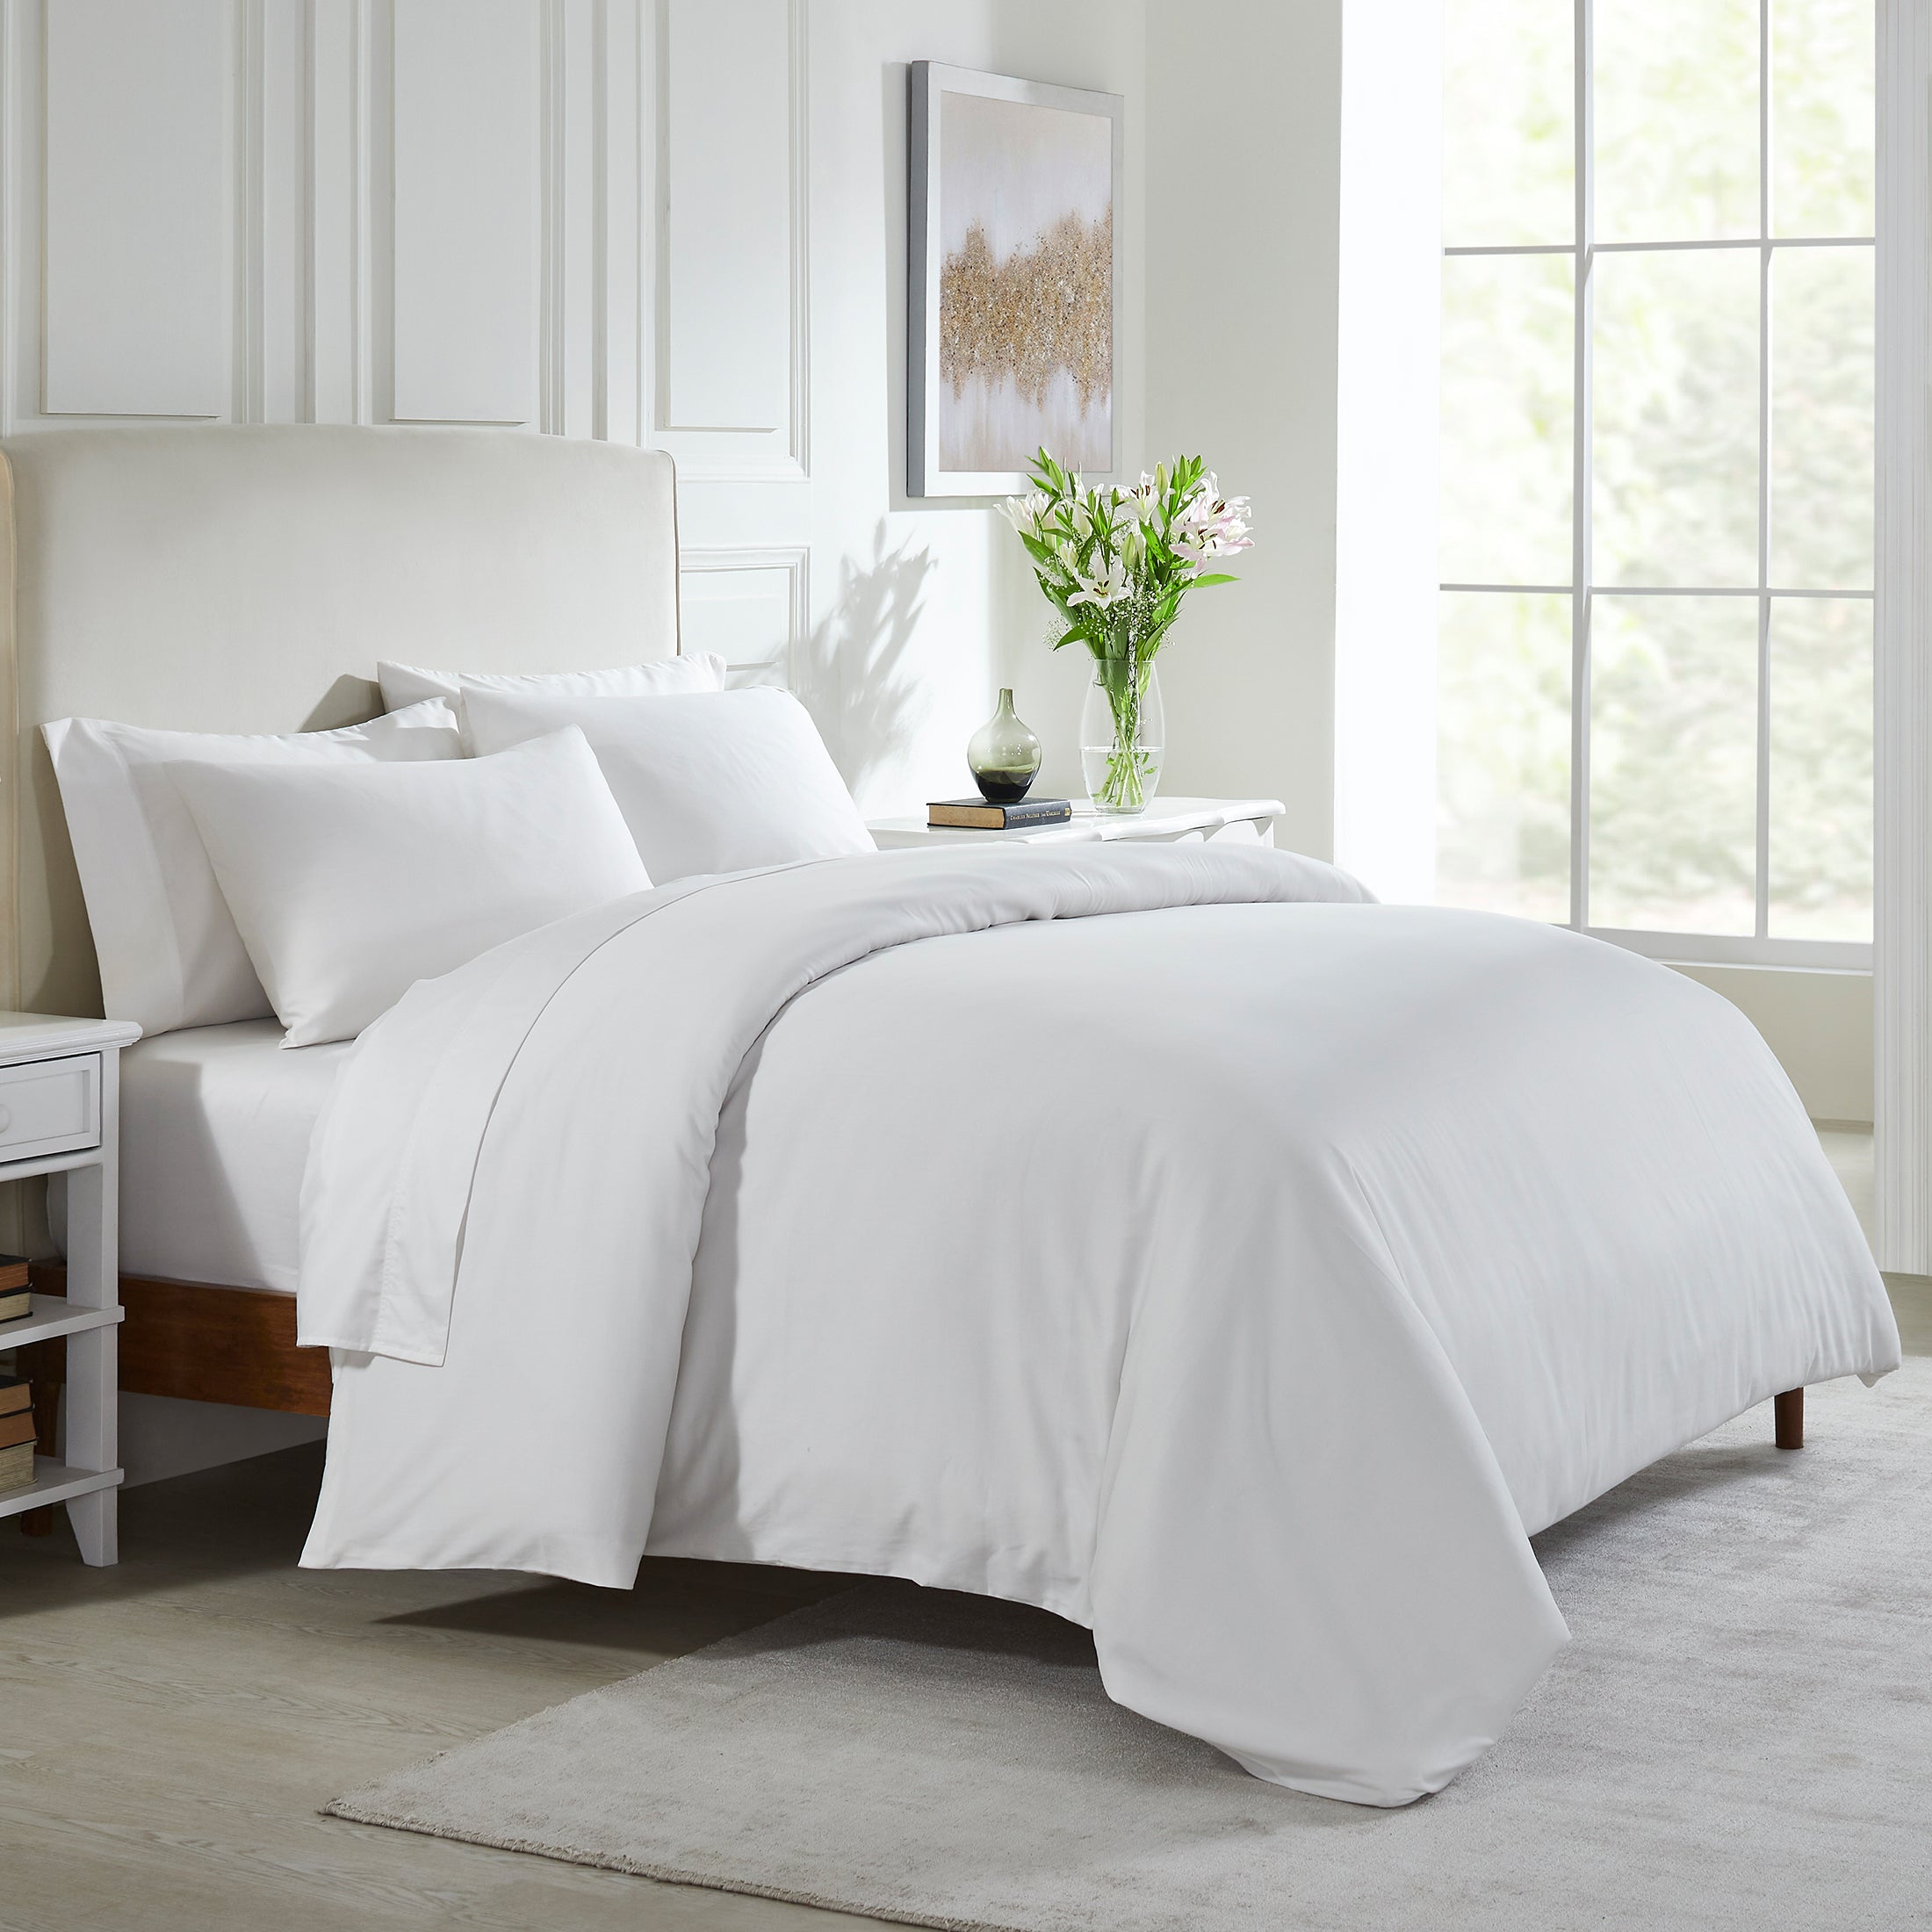 Best Fitted Sheet That Stays Tight: Sleep Tight Tonight! – California  Design Den